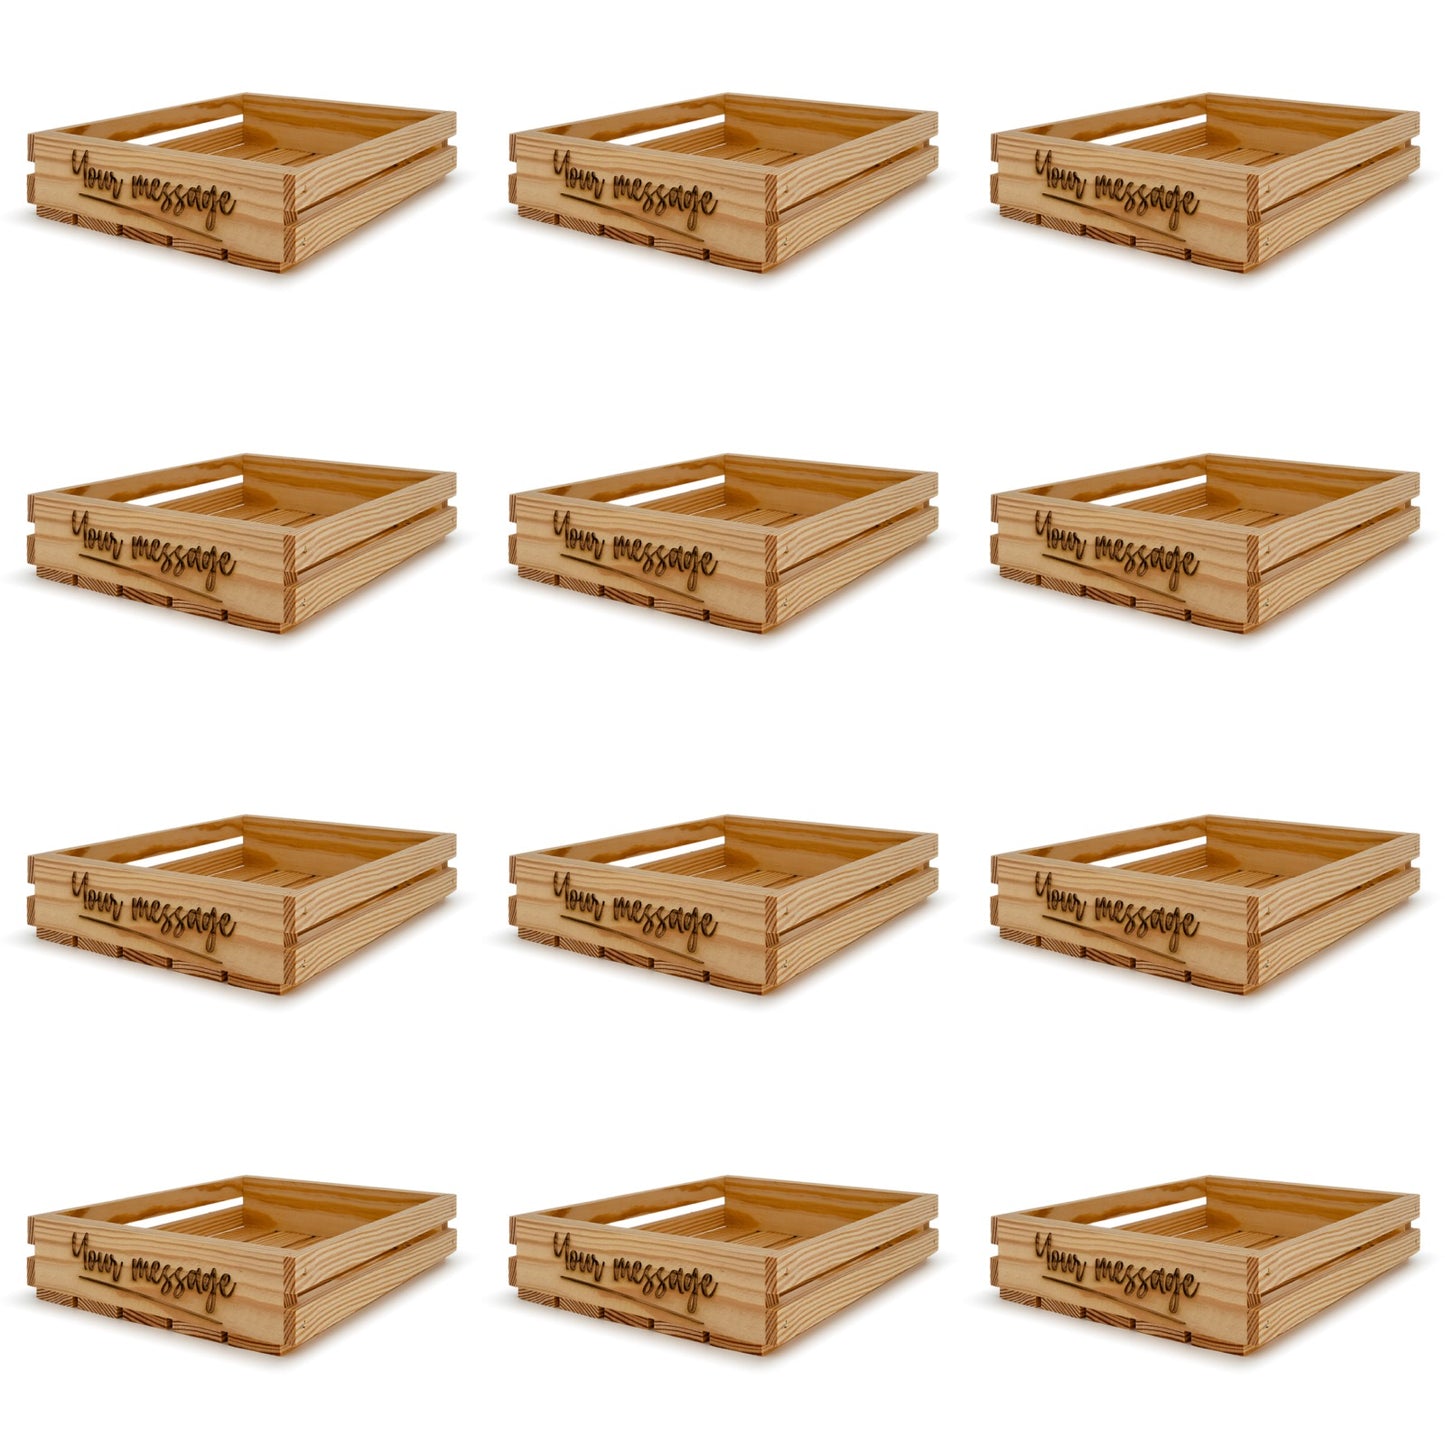 12 Small wooden crates 12x10x2.5 your message included